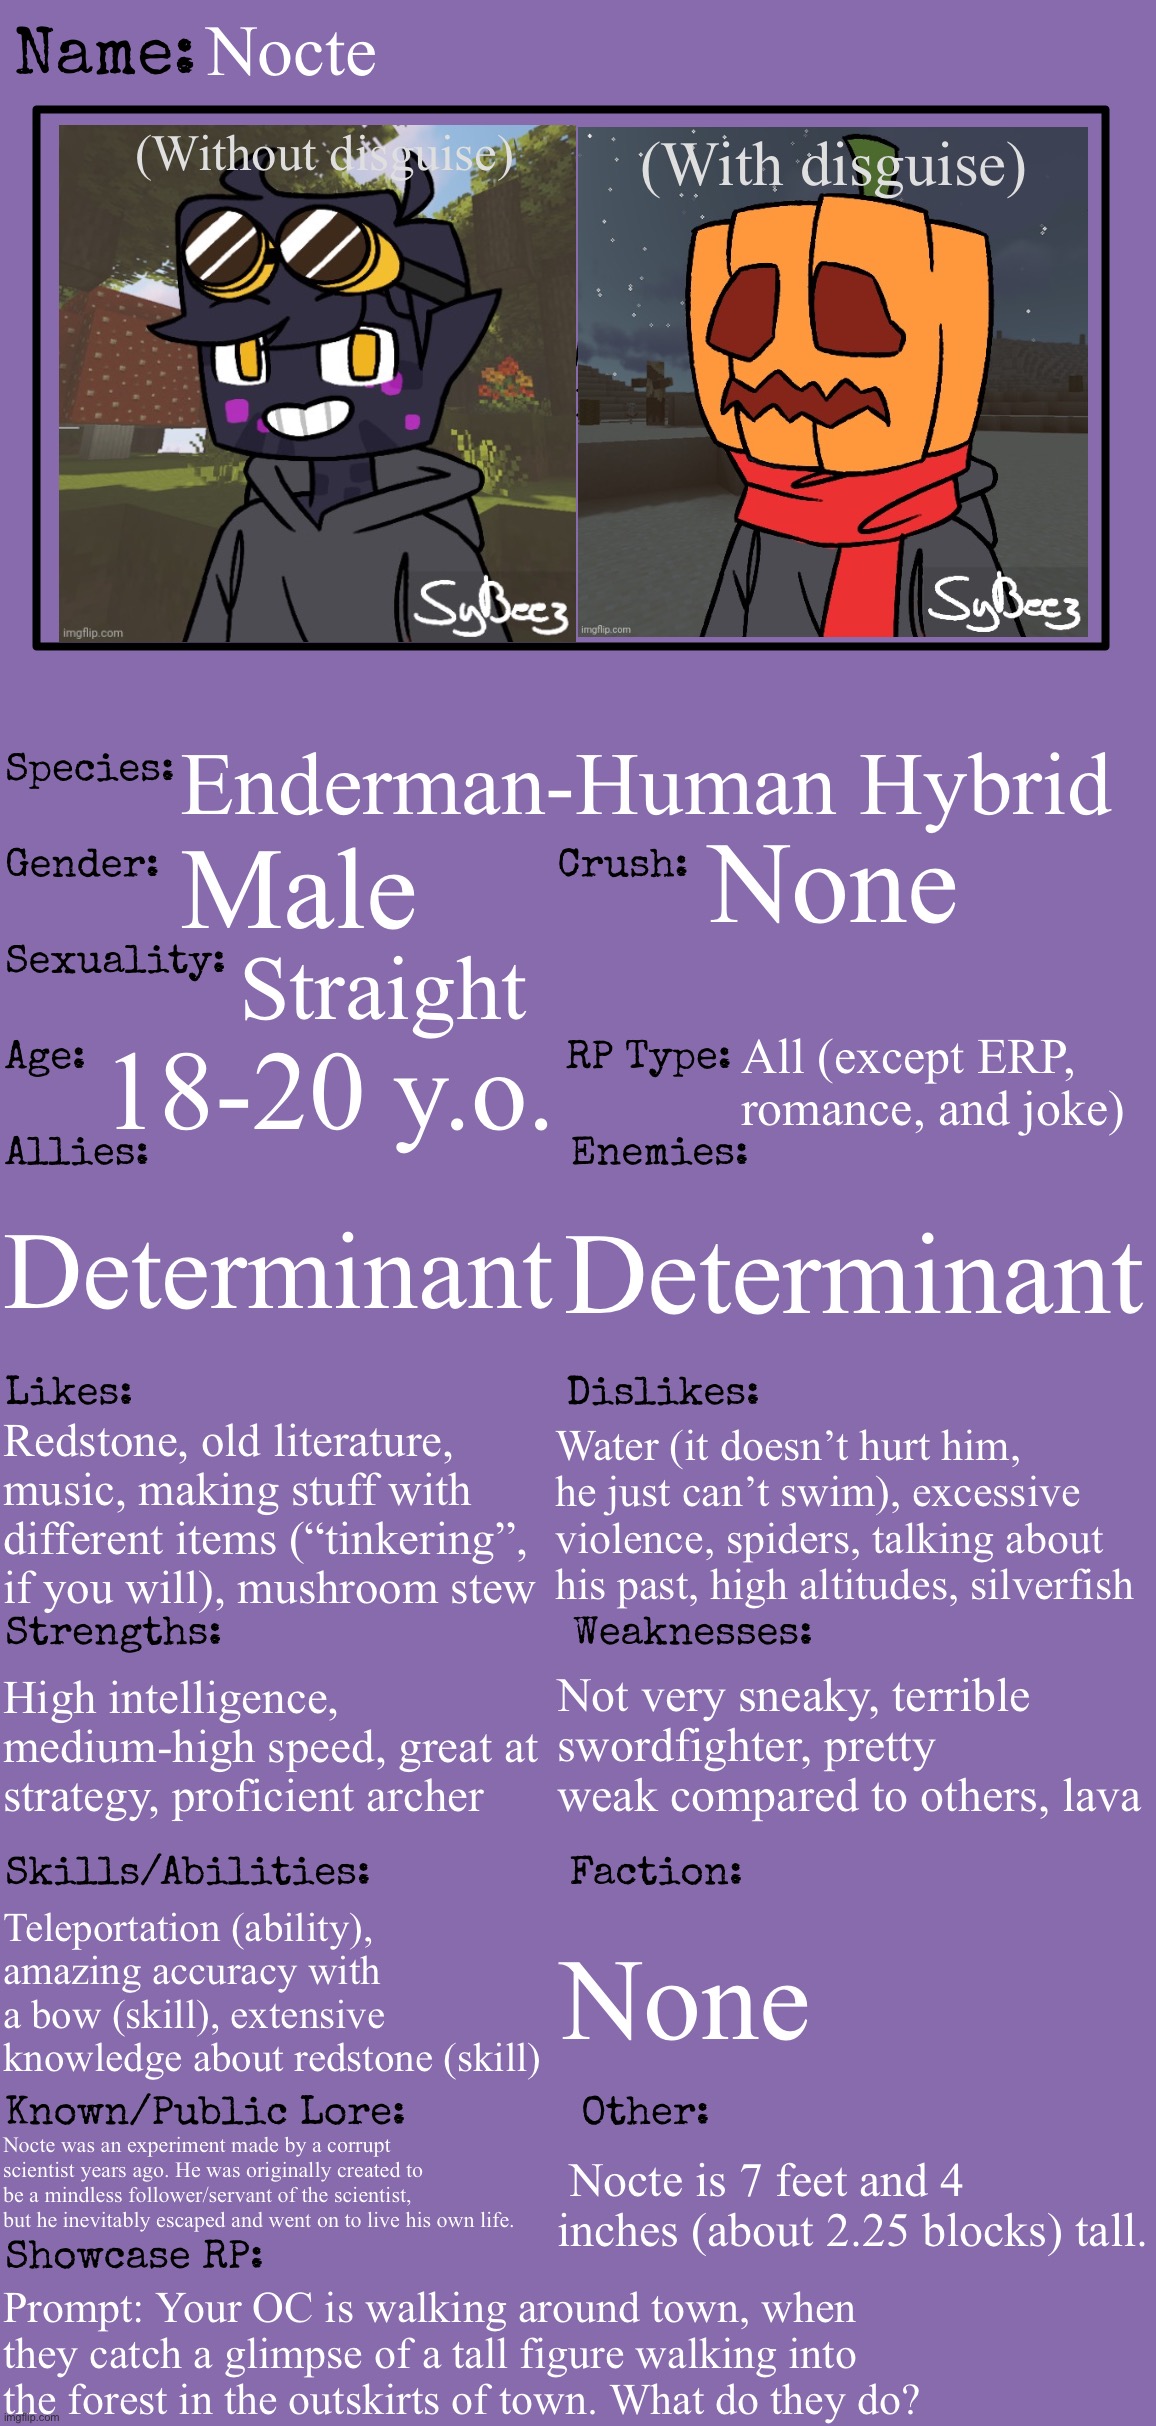 A remake of a roleplay I did a while back. Old version: imgflip.com/i/6jdjuc | Nocte; (With disguise); (Without disguise); Enderman-Human Hybrid; None; Male; Straight; 18-20 y.o. All (except ERP, romance, and joke); Determinant; Determinant; Redstone, old literature, music, making stuff with different items (“tinkering”, if you will), mushroom stew; Water (it doesn’t hurt him, he just can’t swim), excessive violence, spiders, talking about his past, high altitudes, silverfish; Not very sneaky, terrible swordfighter, pretty weak compared to others, lava; High intelligence, medium-high speed, great at strategy, proficient archer; None; Teleportation (ability), amazing accuracy with a bow (skill), extensive knowledge about redstone (skill); Nocte was an experiment made by a corrupt scientist years ago. He was originally created to be a mindless follower/servant of the scientist, but he inevitably escaped and went on to live his own life. Nocte is 7 feet and 4 inches (about 2.25 blocks) tall. Prompt: Your OC is walking around town, when they catch a glimpse of a tall figure walking into the forest in the outskirts of town. What do they do? | image tagged in some enderman dude idk,minecraft,minecraft ocs recommended | made w/ Imgflip meme maker